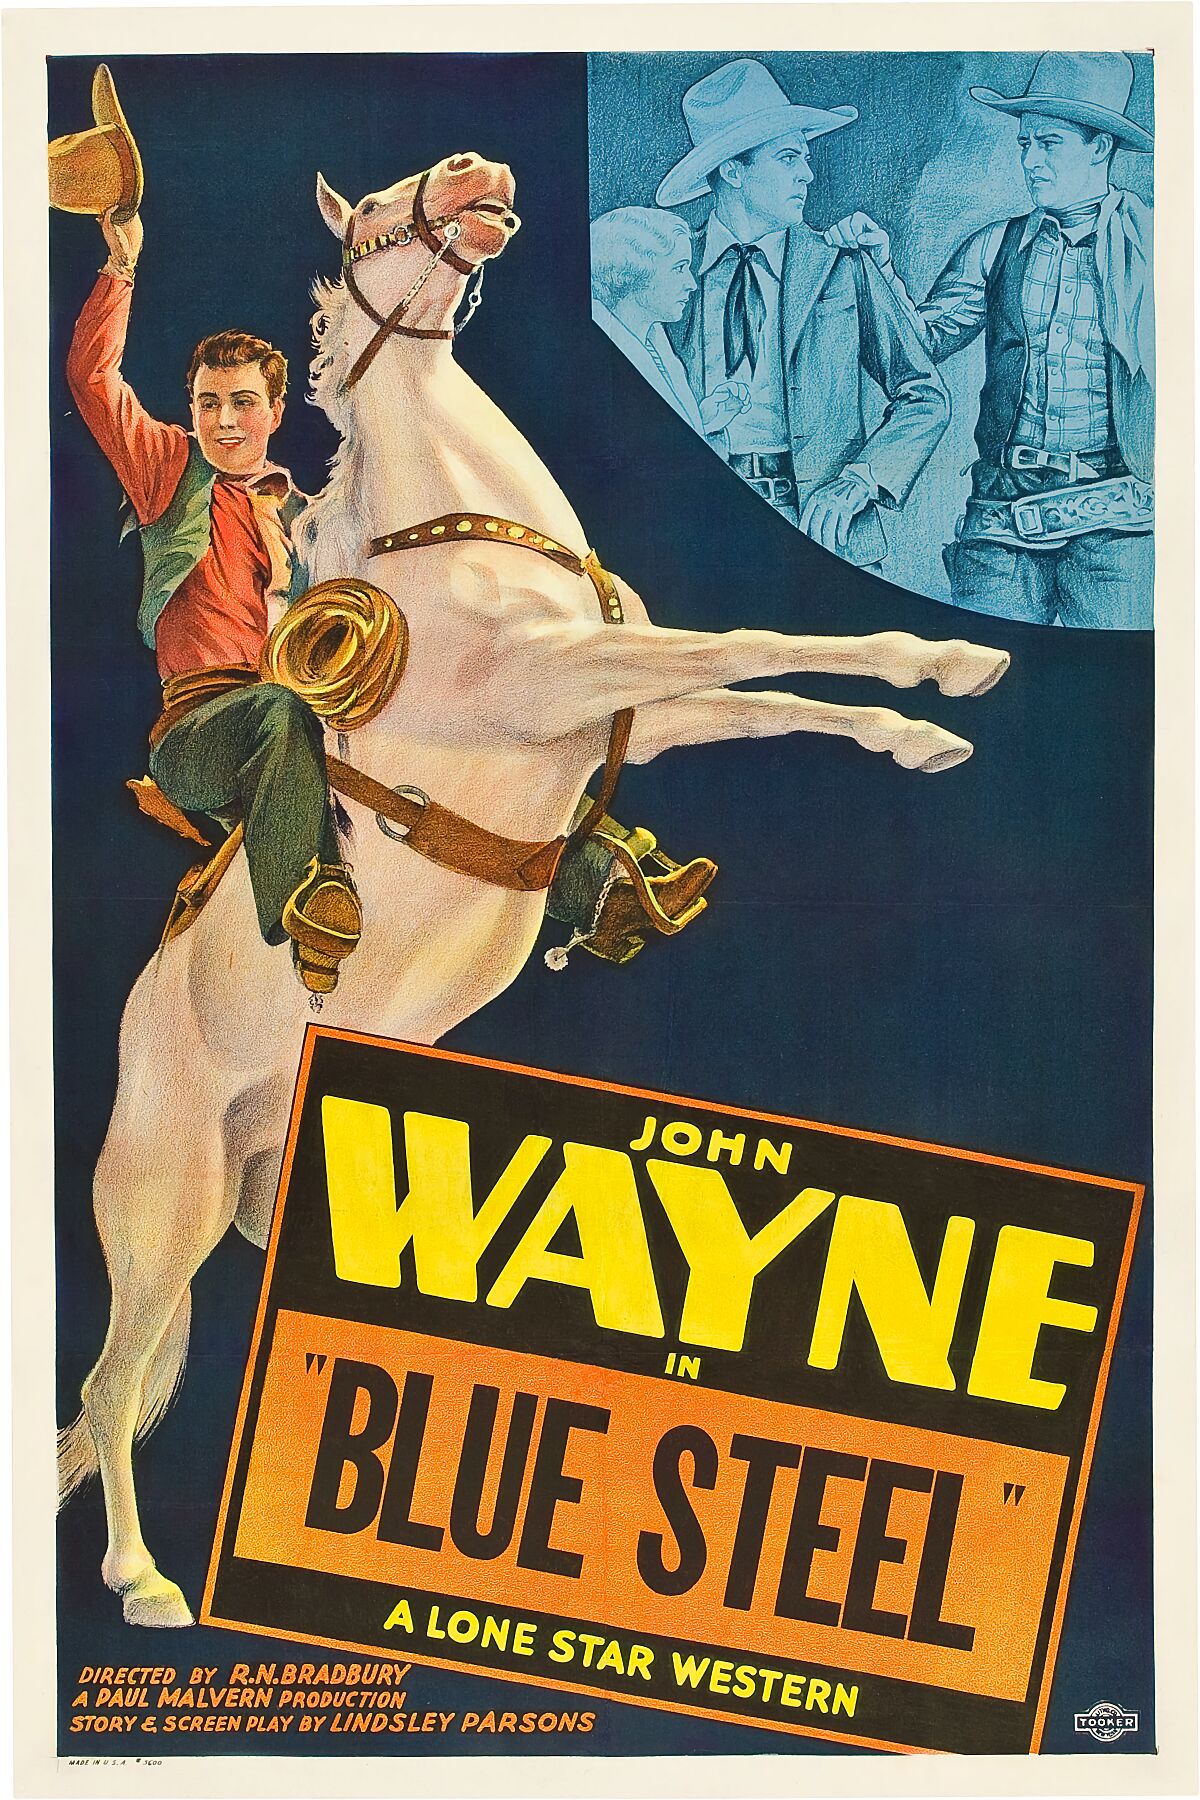 Poster for the 1934 film Blue Steel.